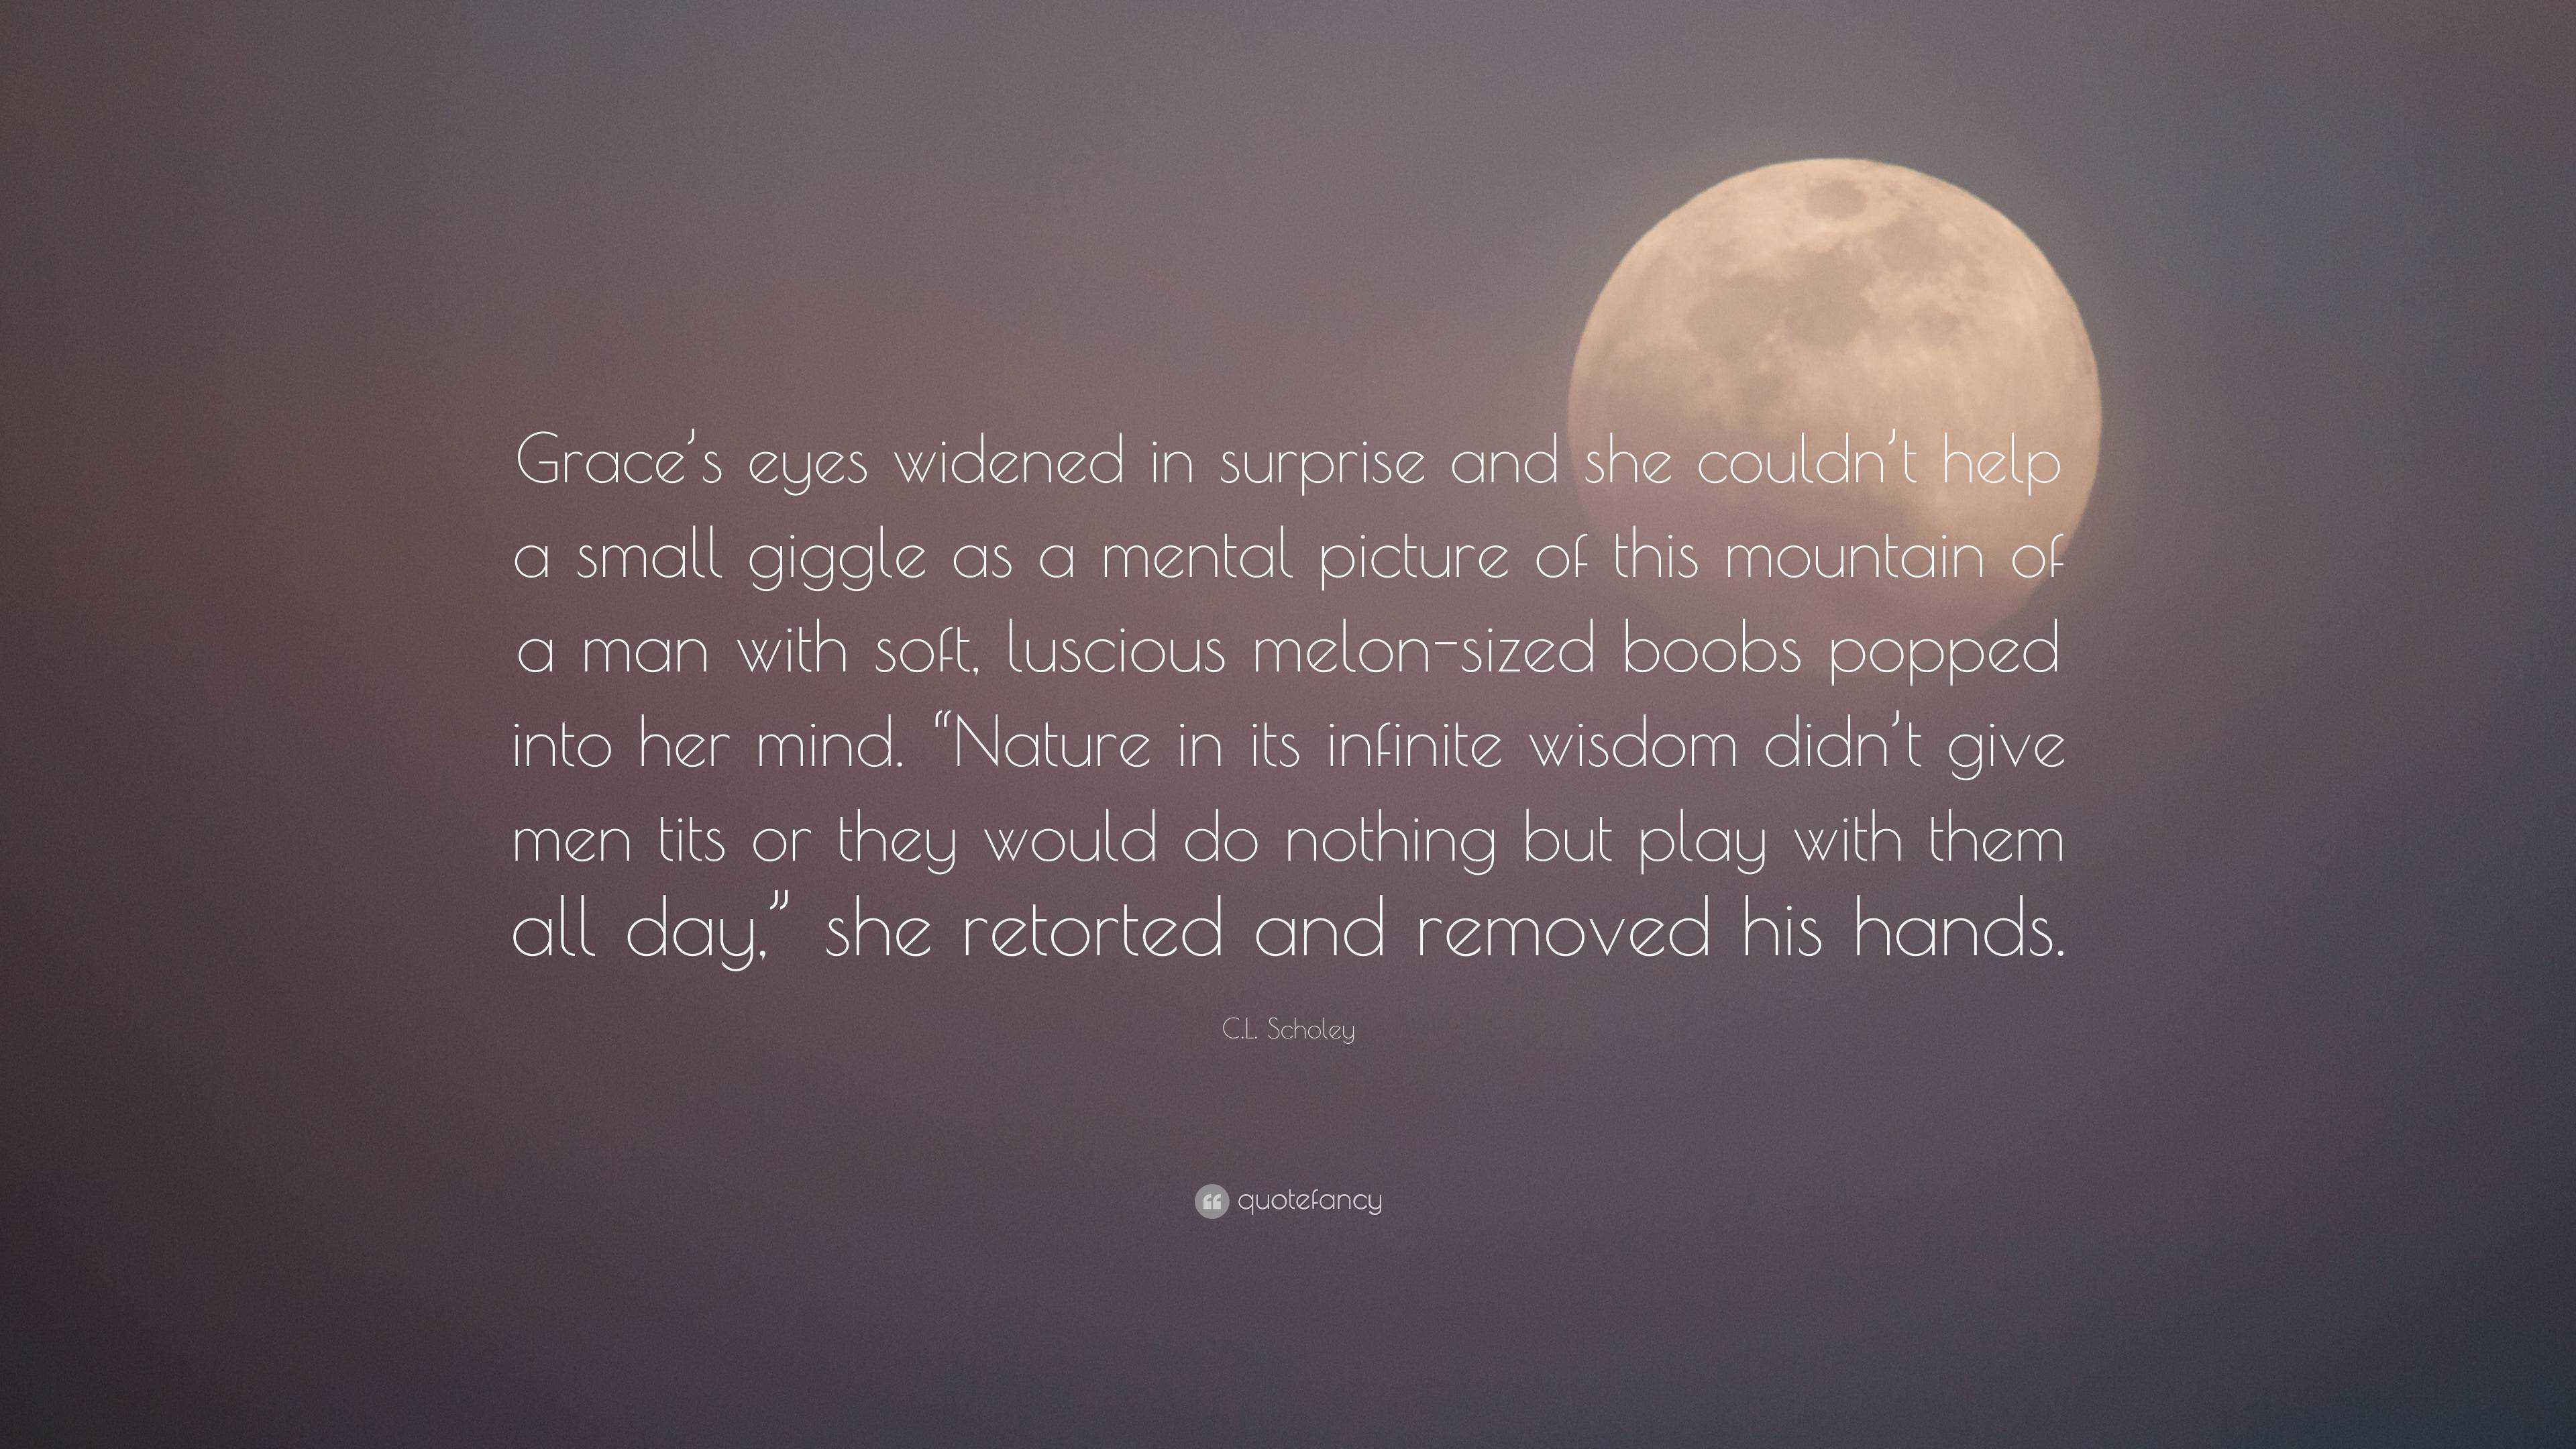 https://quotefancy.com/media/wallpaper/3840x2160/6874021-C-L-Scholey-Quote-Grace-s-eyes-widened-in-surprise-and-she-couldn.jpg